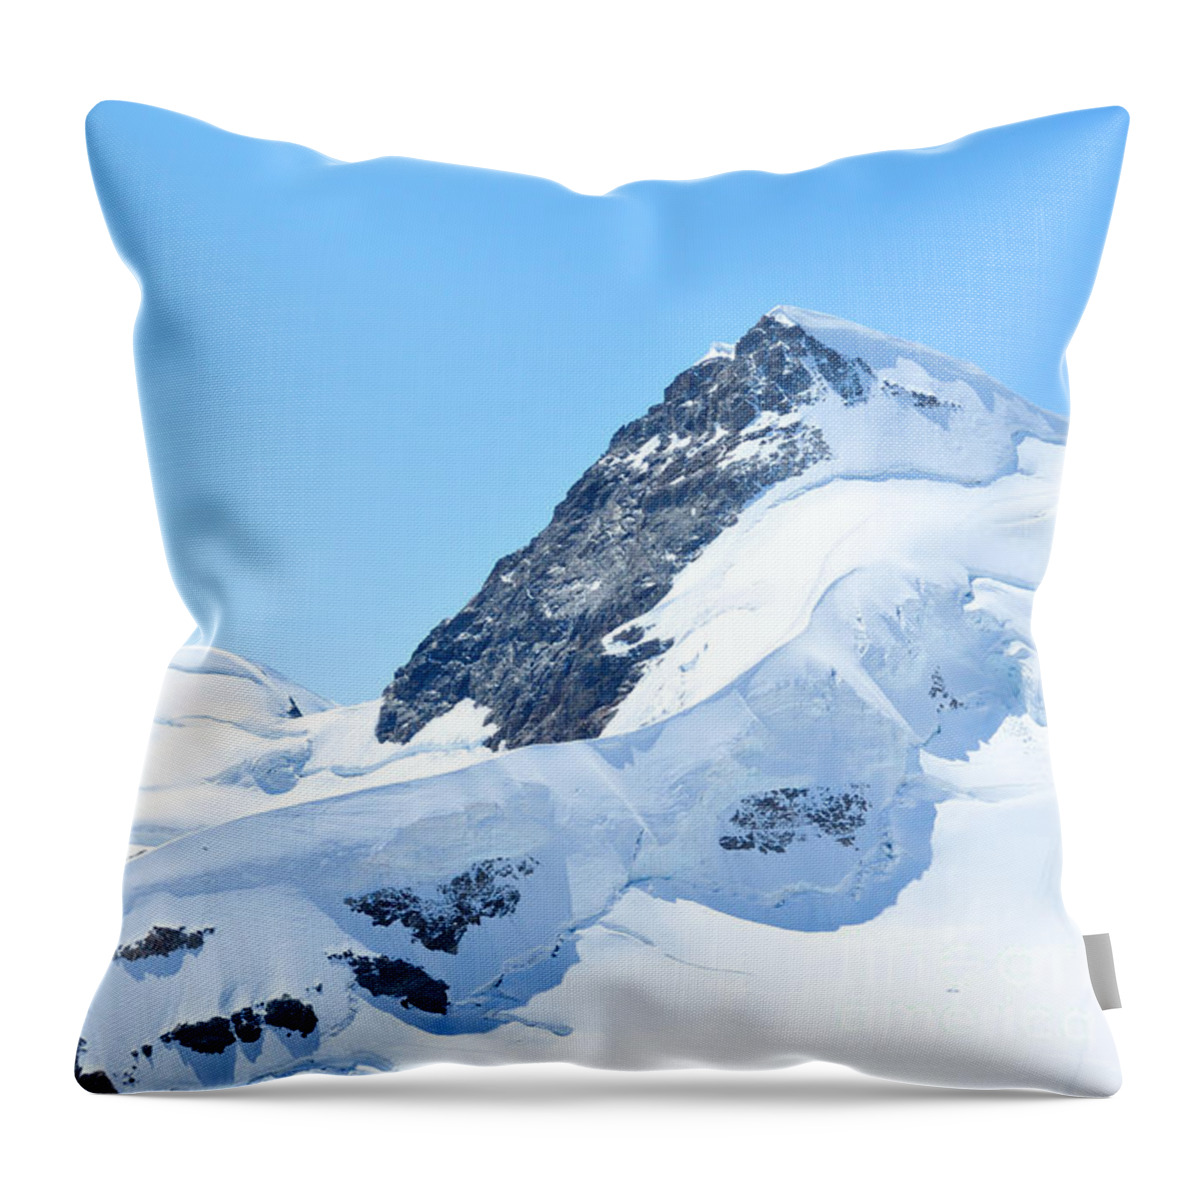 Swiss Alps Throw Pillow featuring the photograph Swiss Alps by Joe Ng